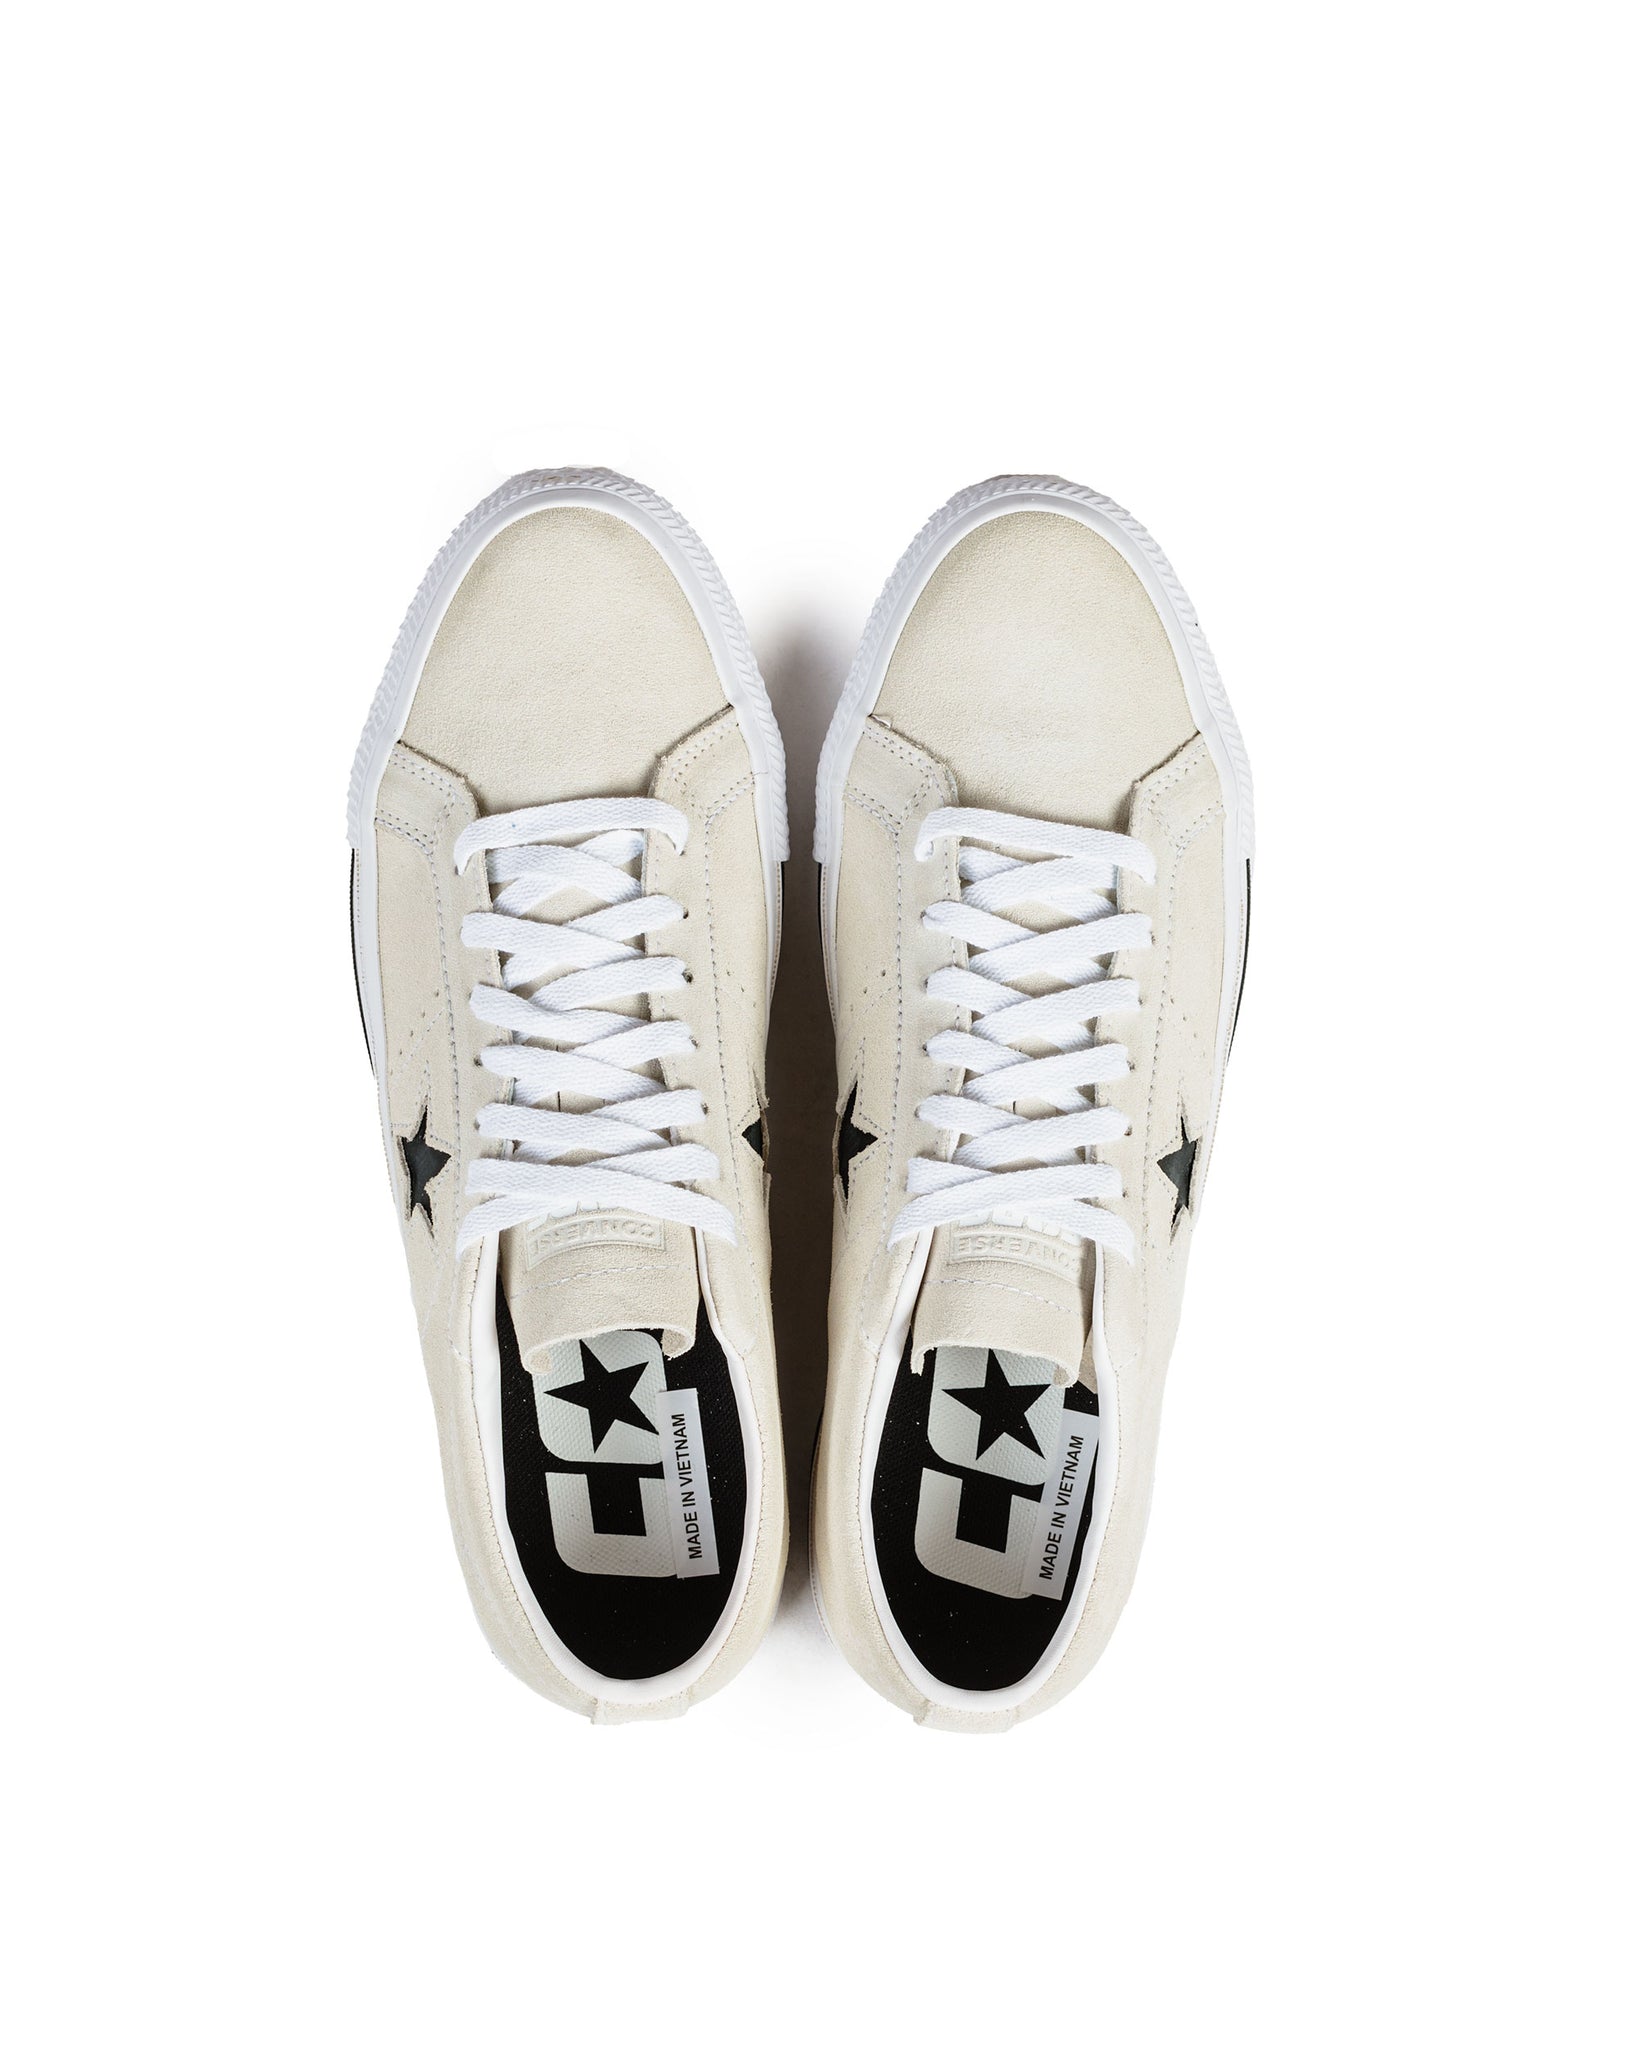 Converse One Star Pro Ox Egret 172950C Top